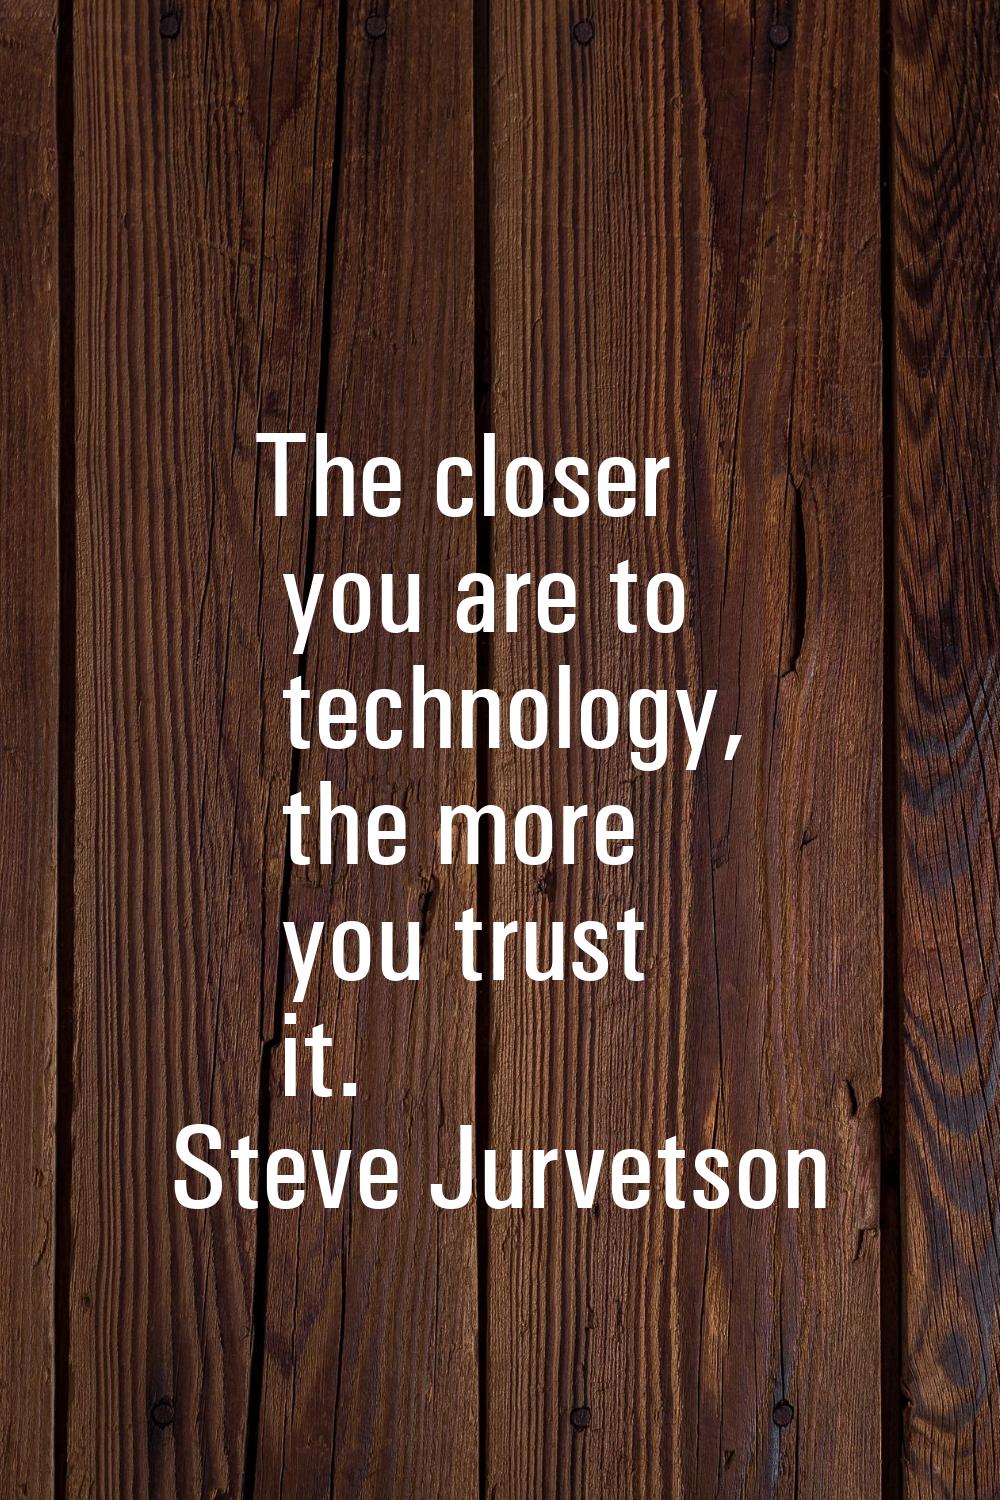 The closer you are to technology, the more you trust it.